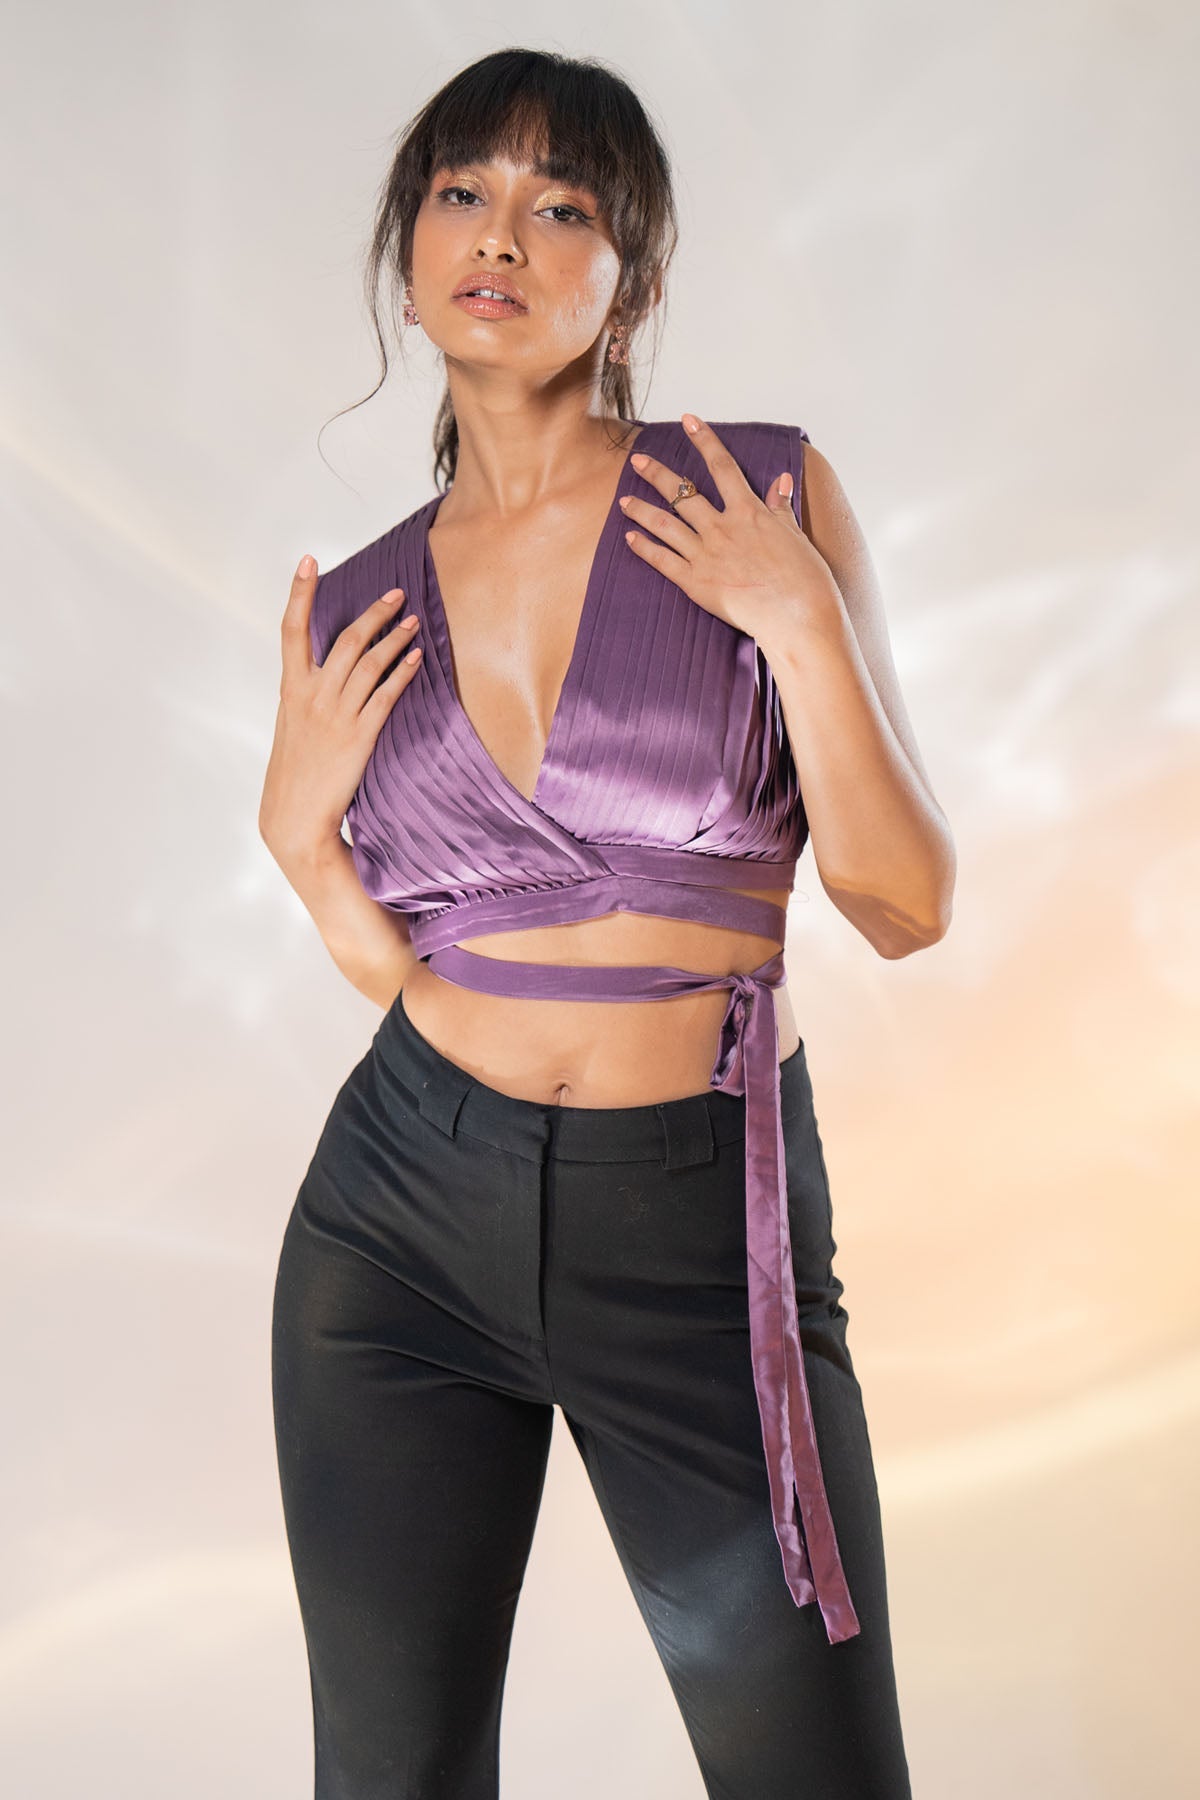 The Decem Ally Mauve Deep V-Neck Pleated Top for Women online available at scrollnshops